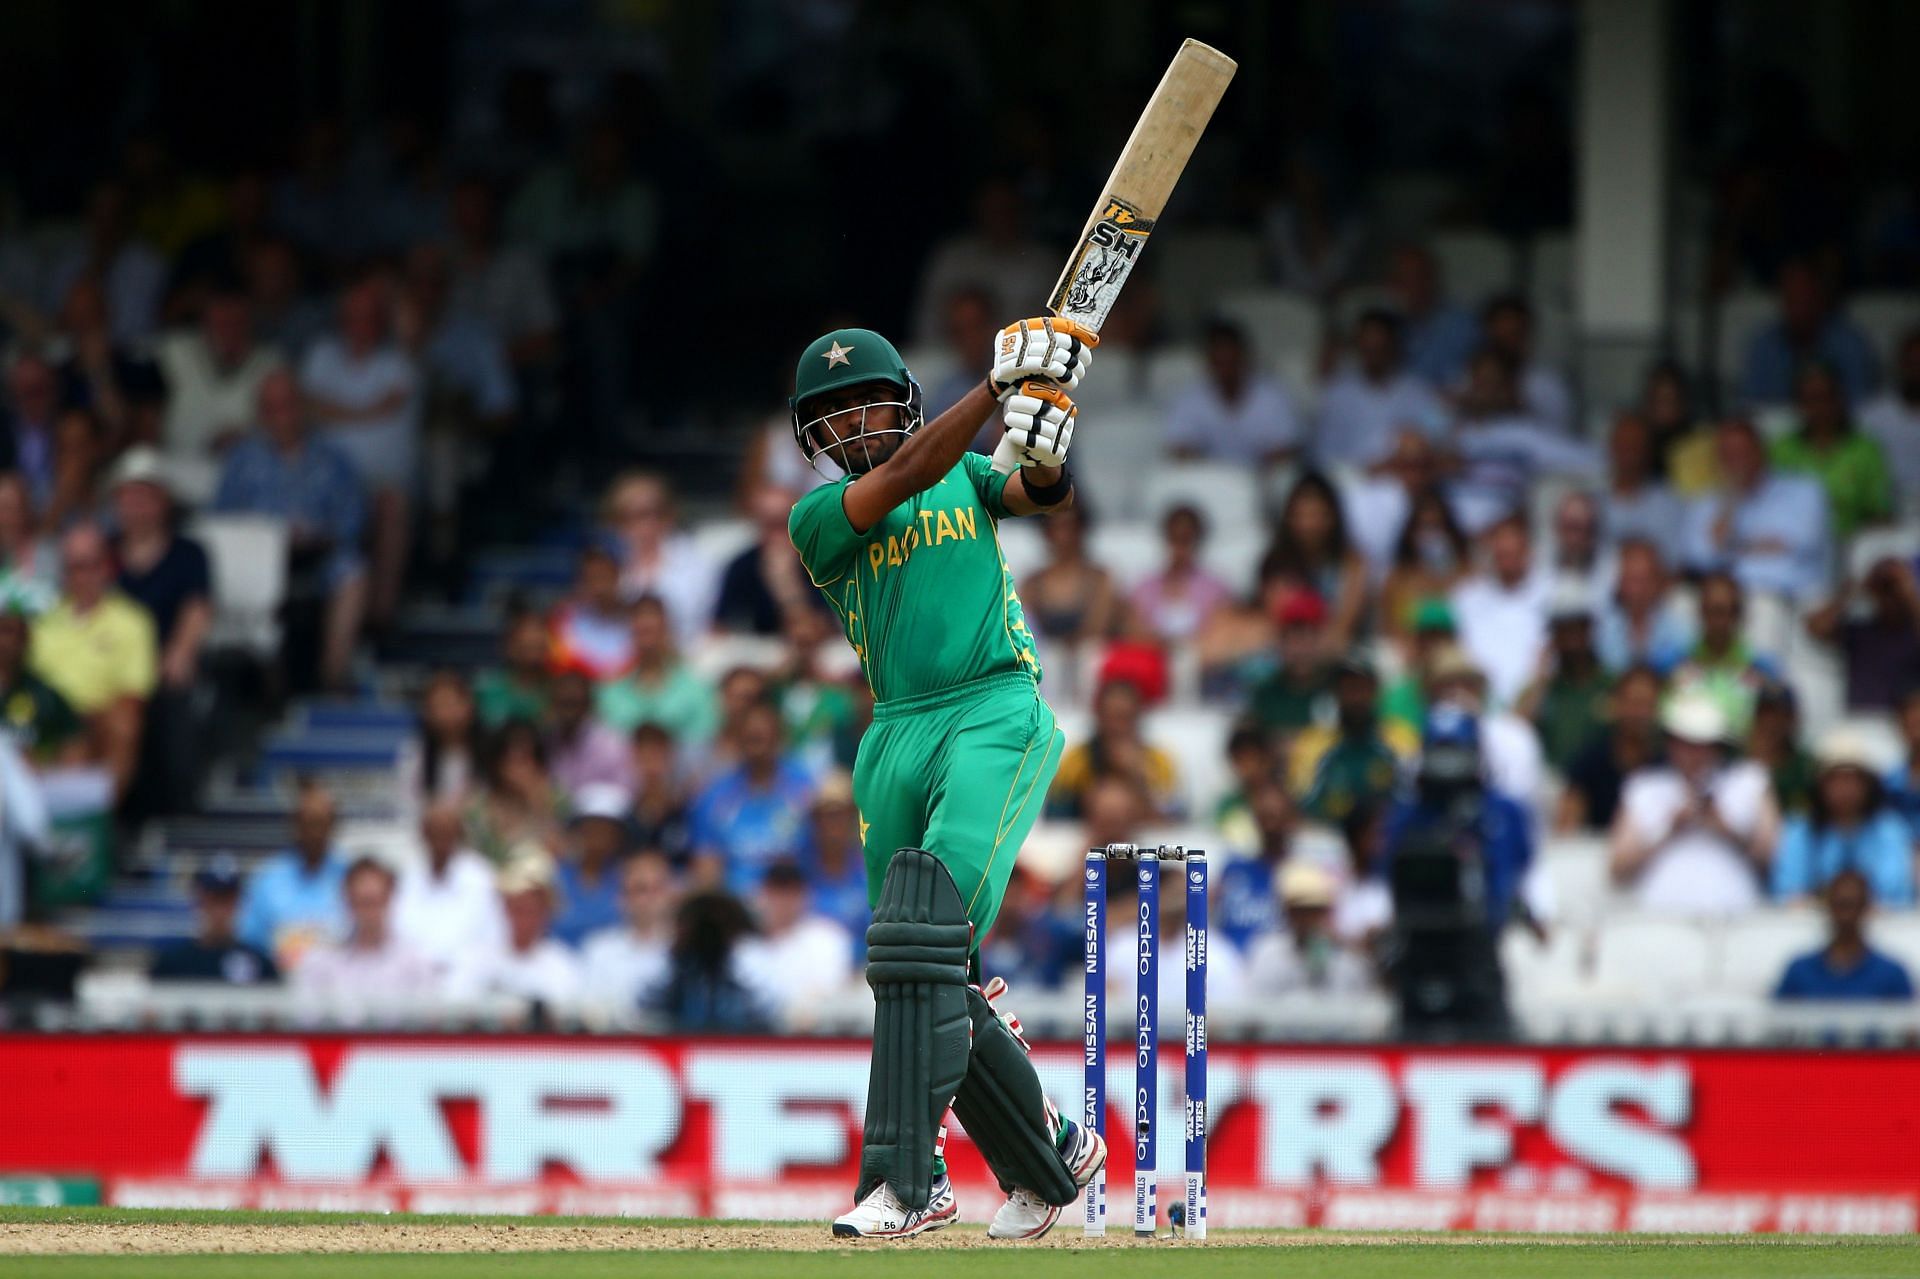 Babar Azam hits out during the ICC Champions Trophy Final. (Pic: Getty Images)